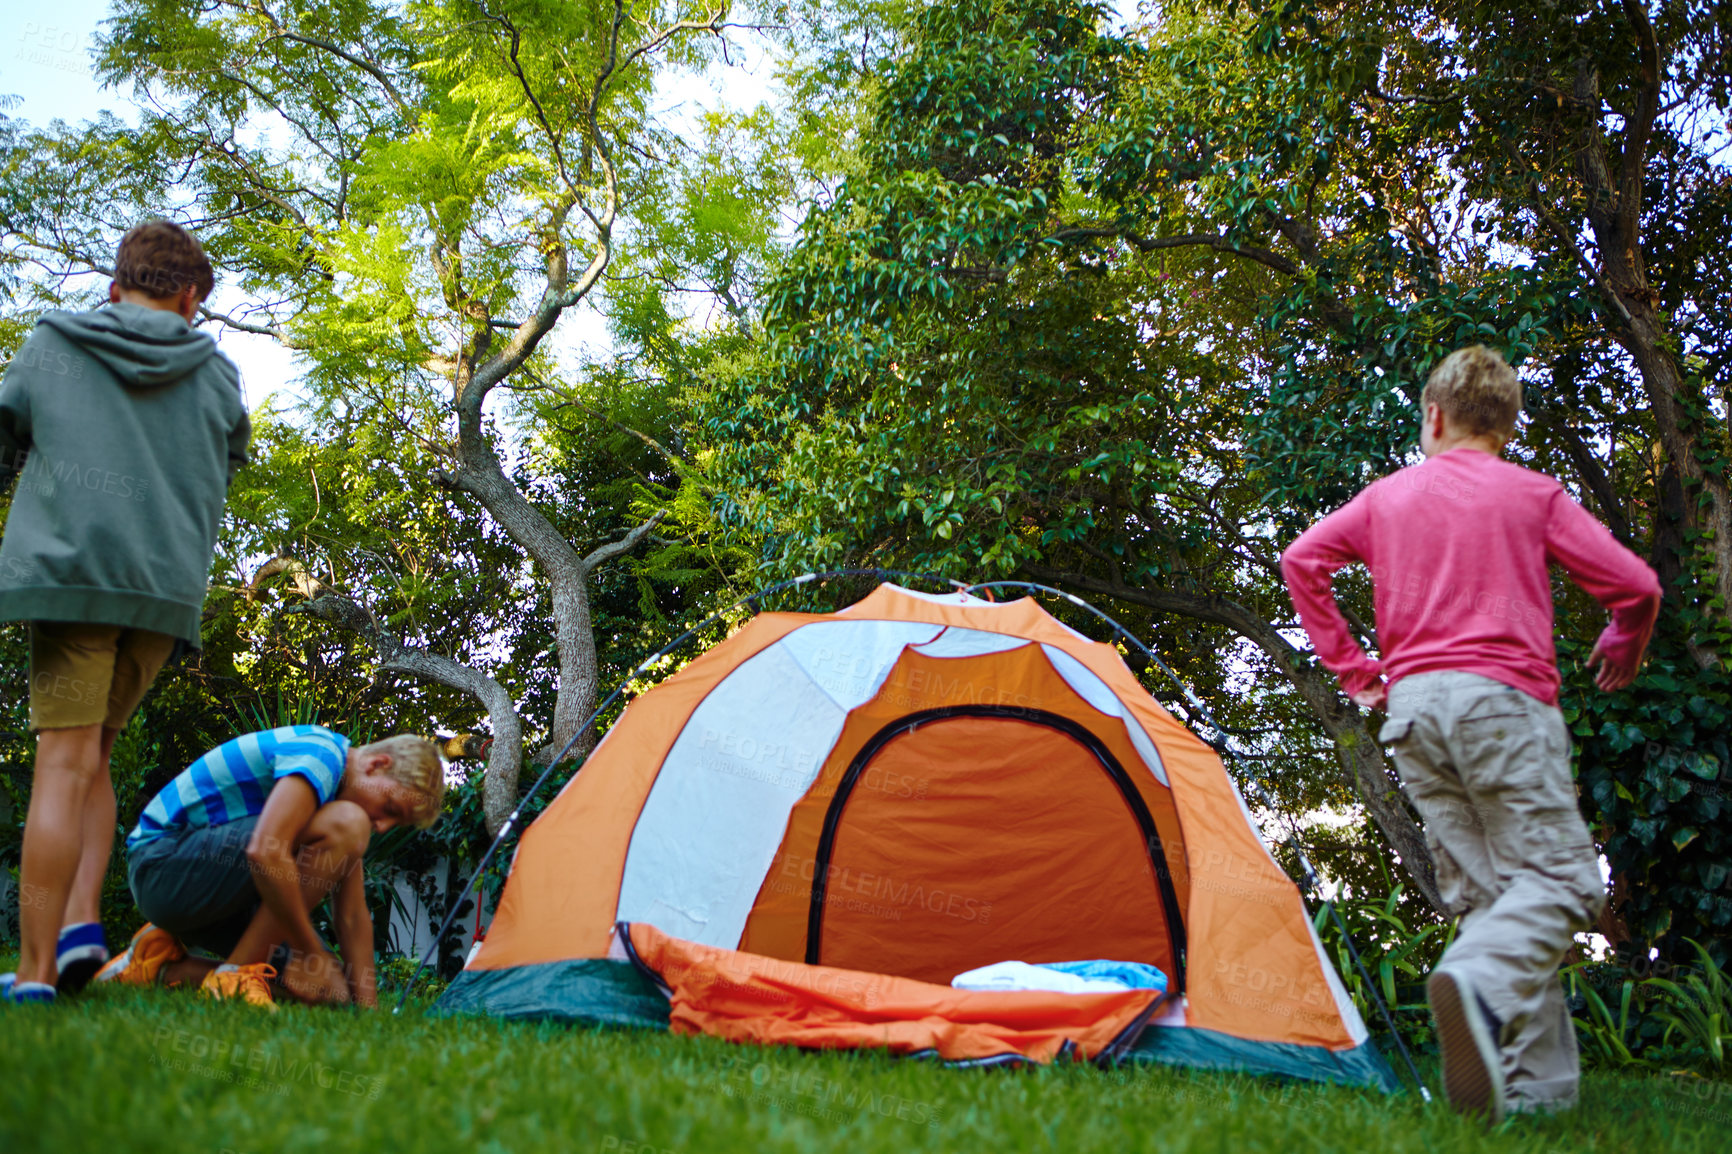 Buy stock photo Shot of three young boys putting up their tent